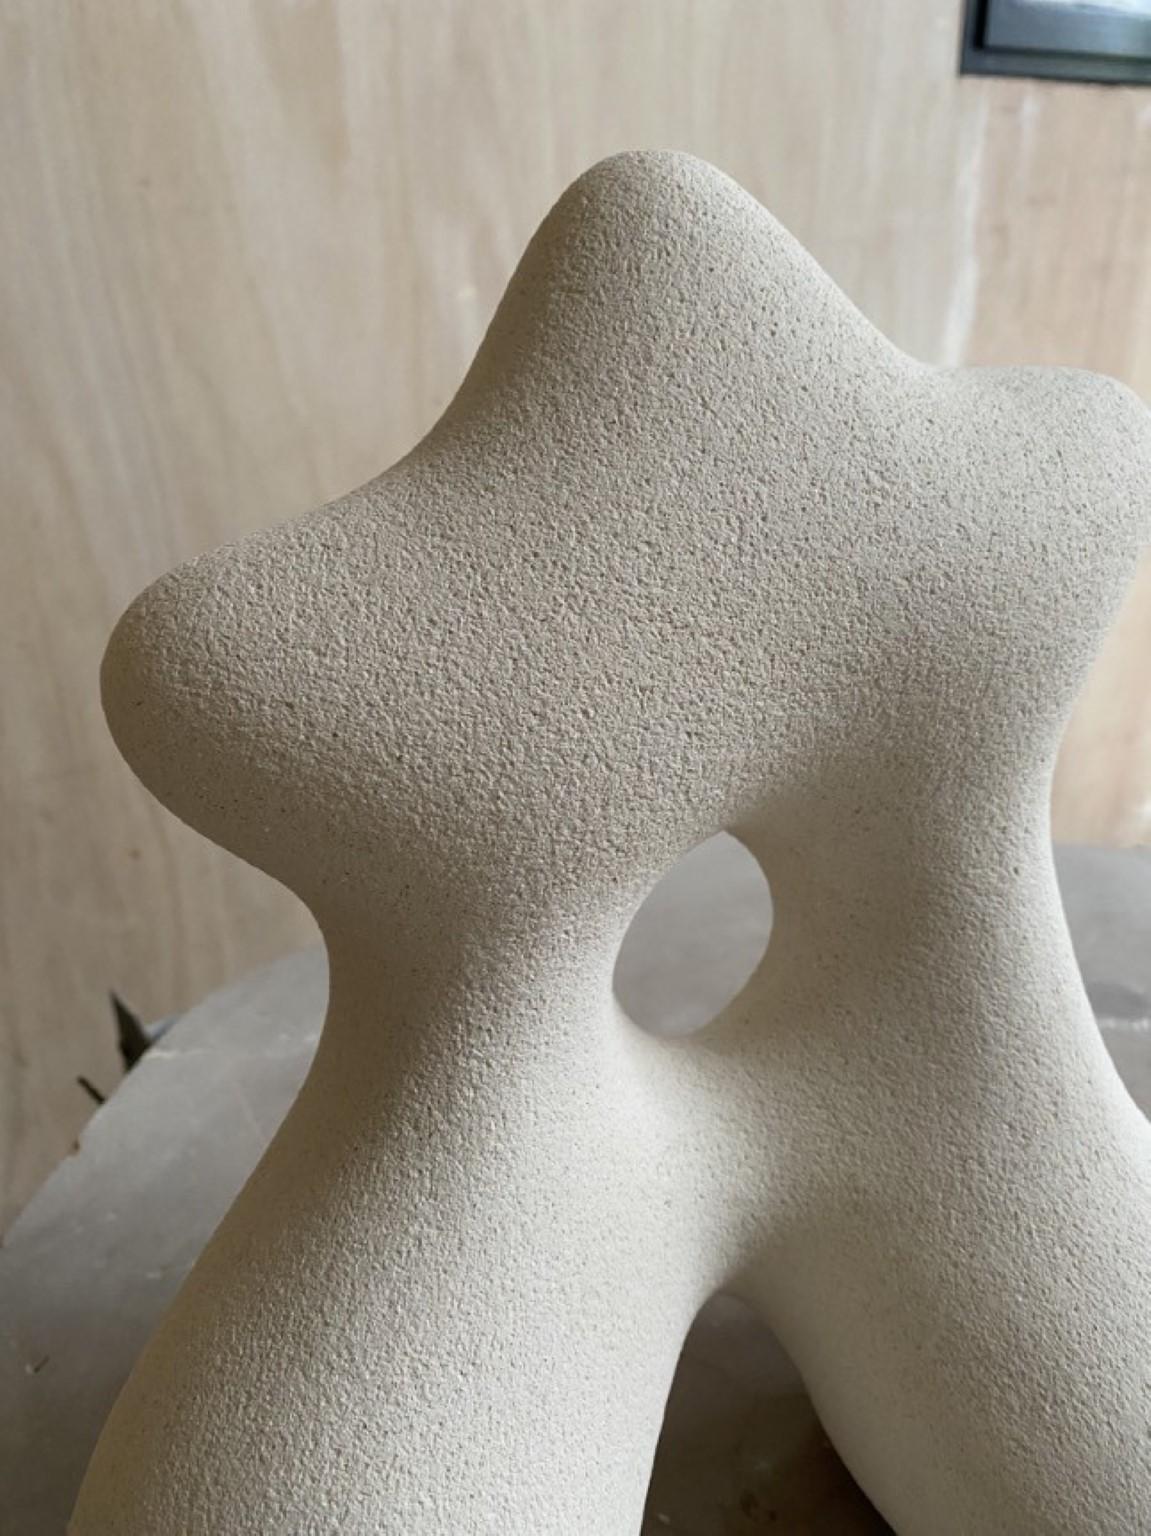 Sandstone Marianne hand sculpted by Hermine Bourdin
Unique
Dimensions: W 27 x H 30 cm
Materials: Sandstone

In my work I’m trying to represent women who are free, who are generous, voluptuous, sensual, strong, thriving and protective.

To me,